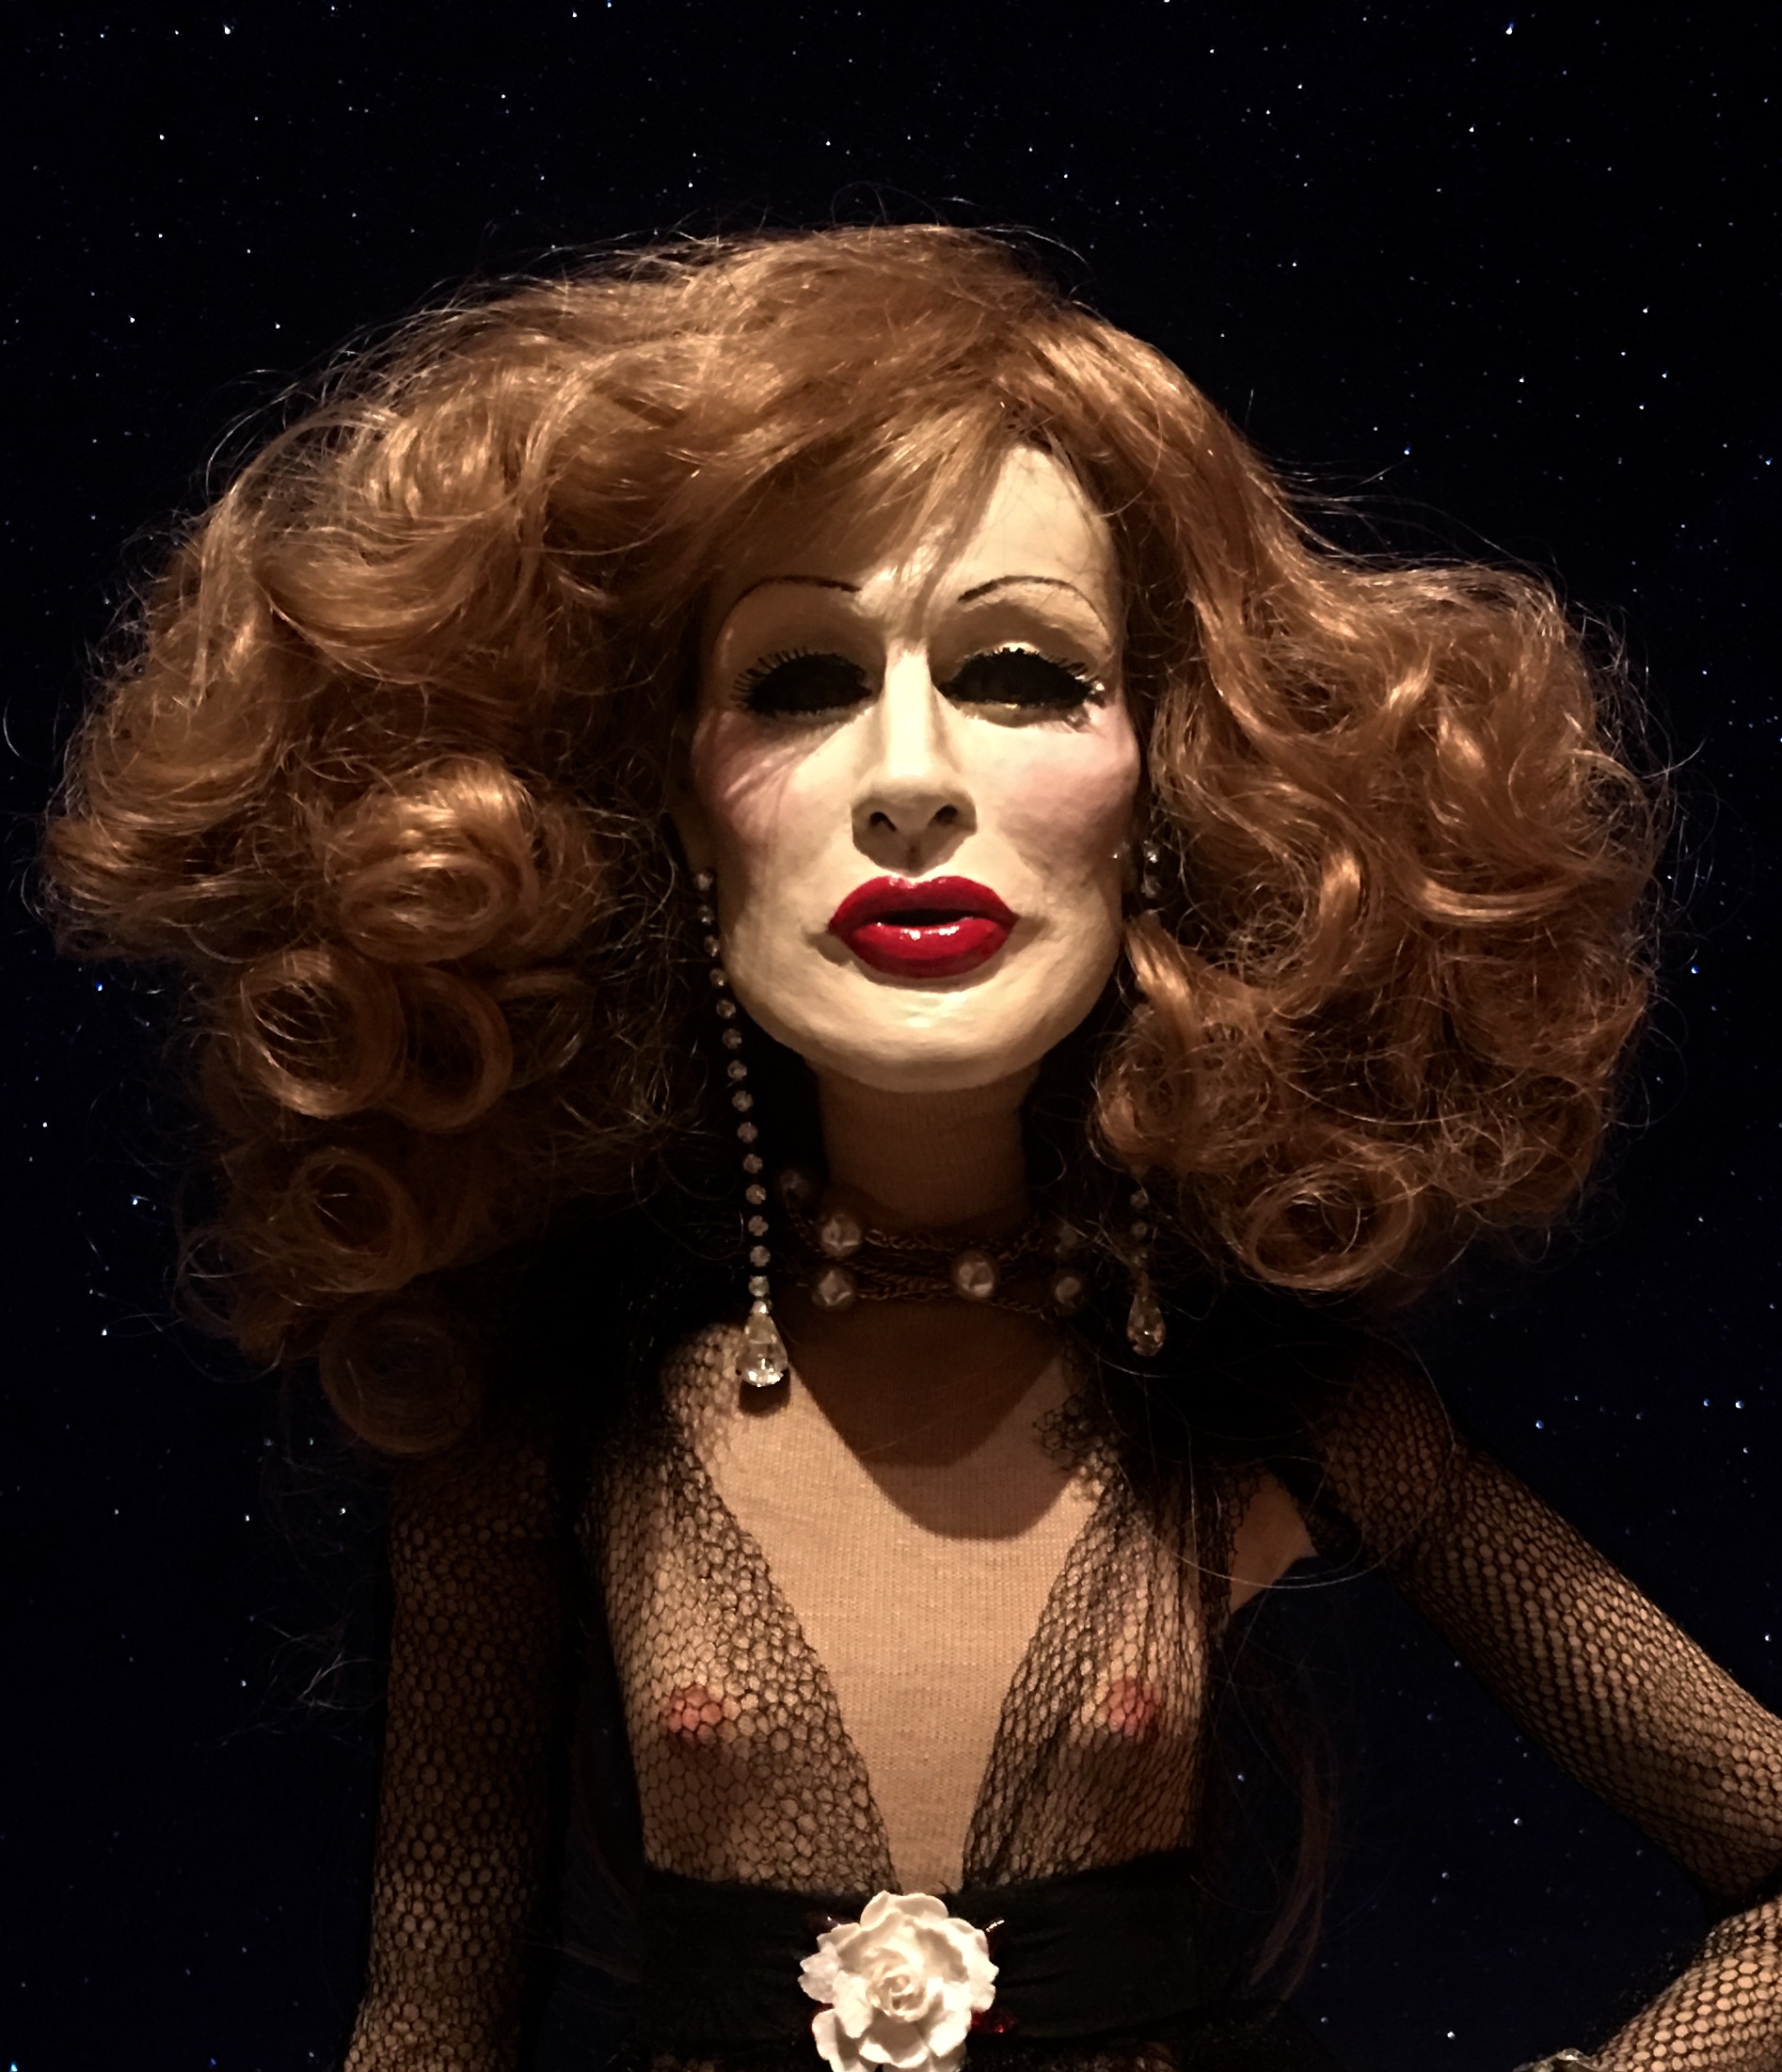 Close-up image of Greek Lankton's Candy Darling celebrity doll